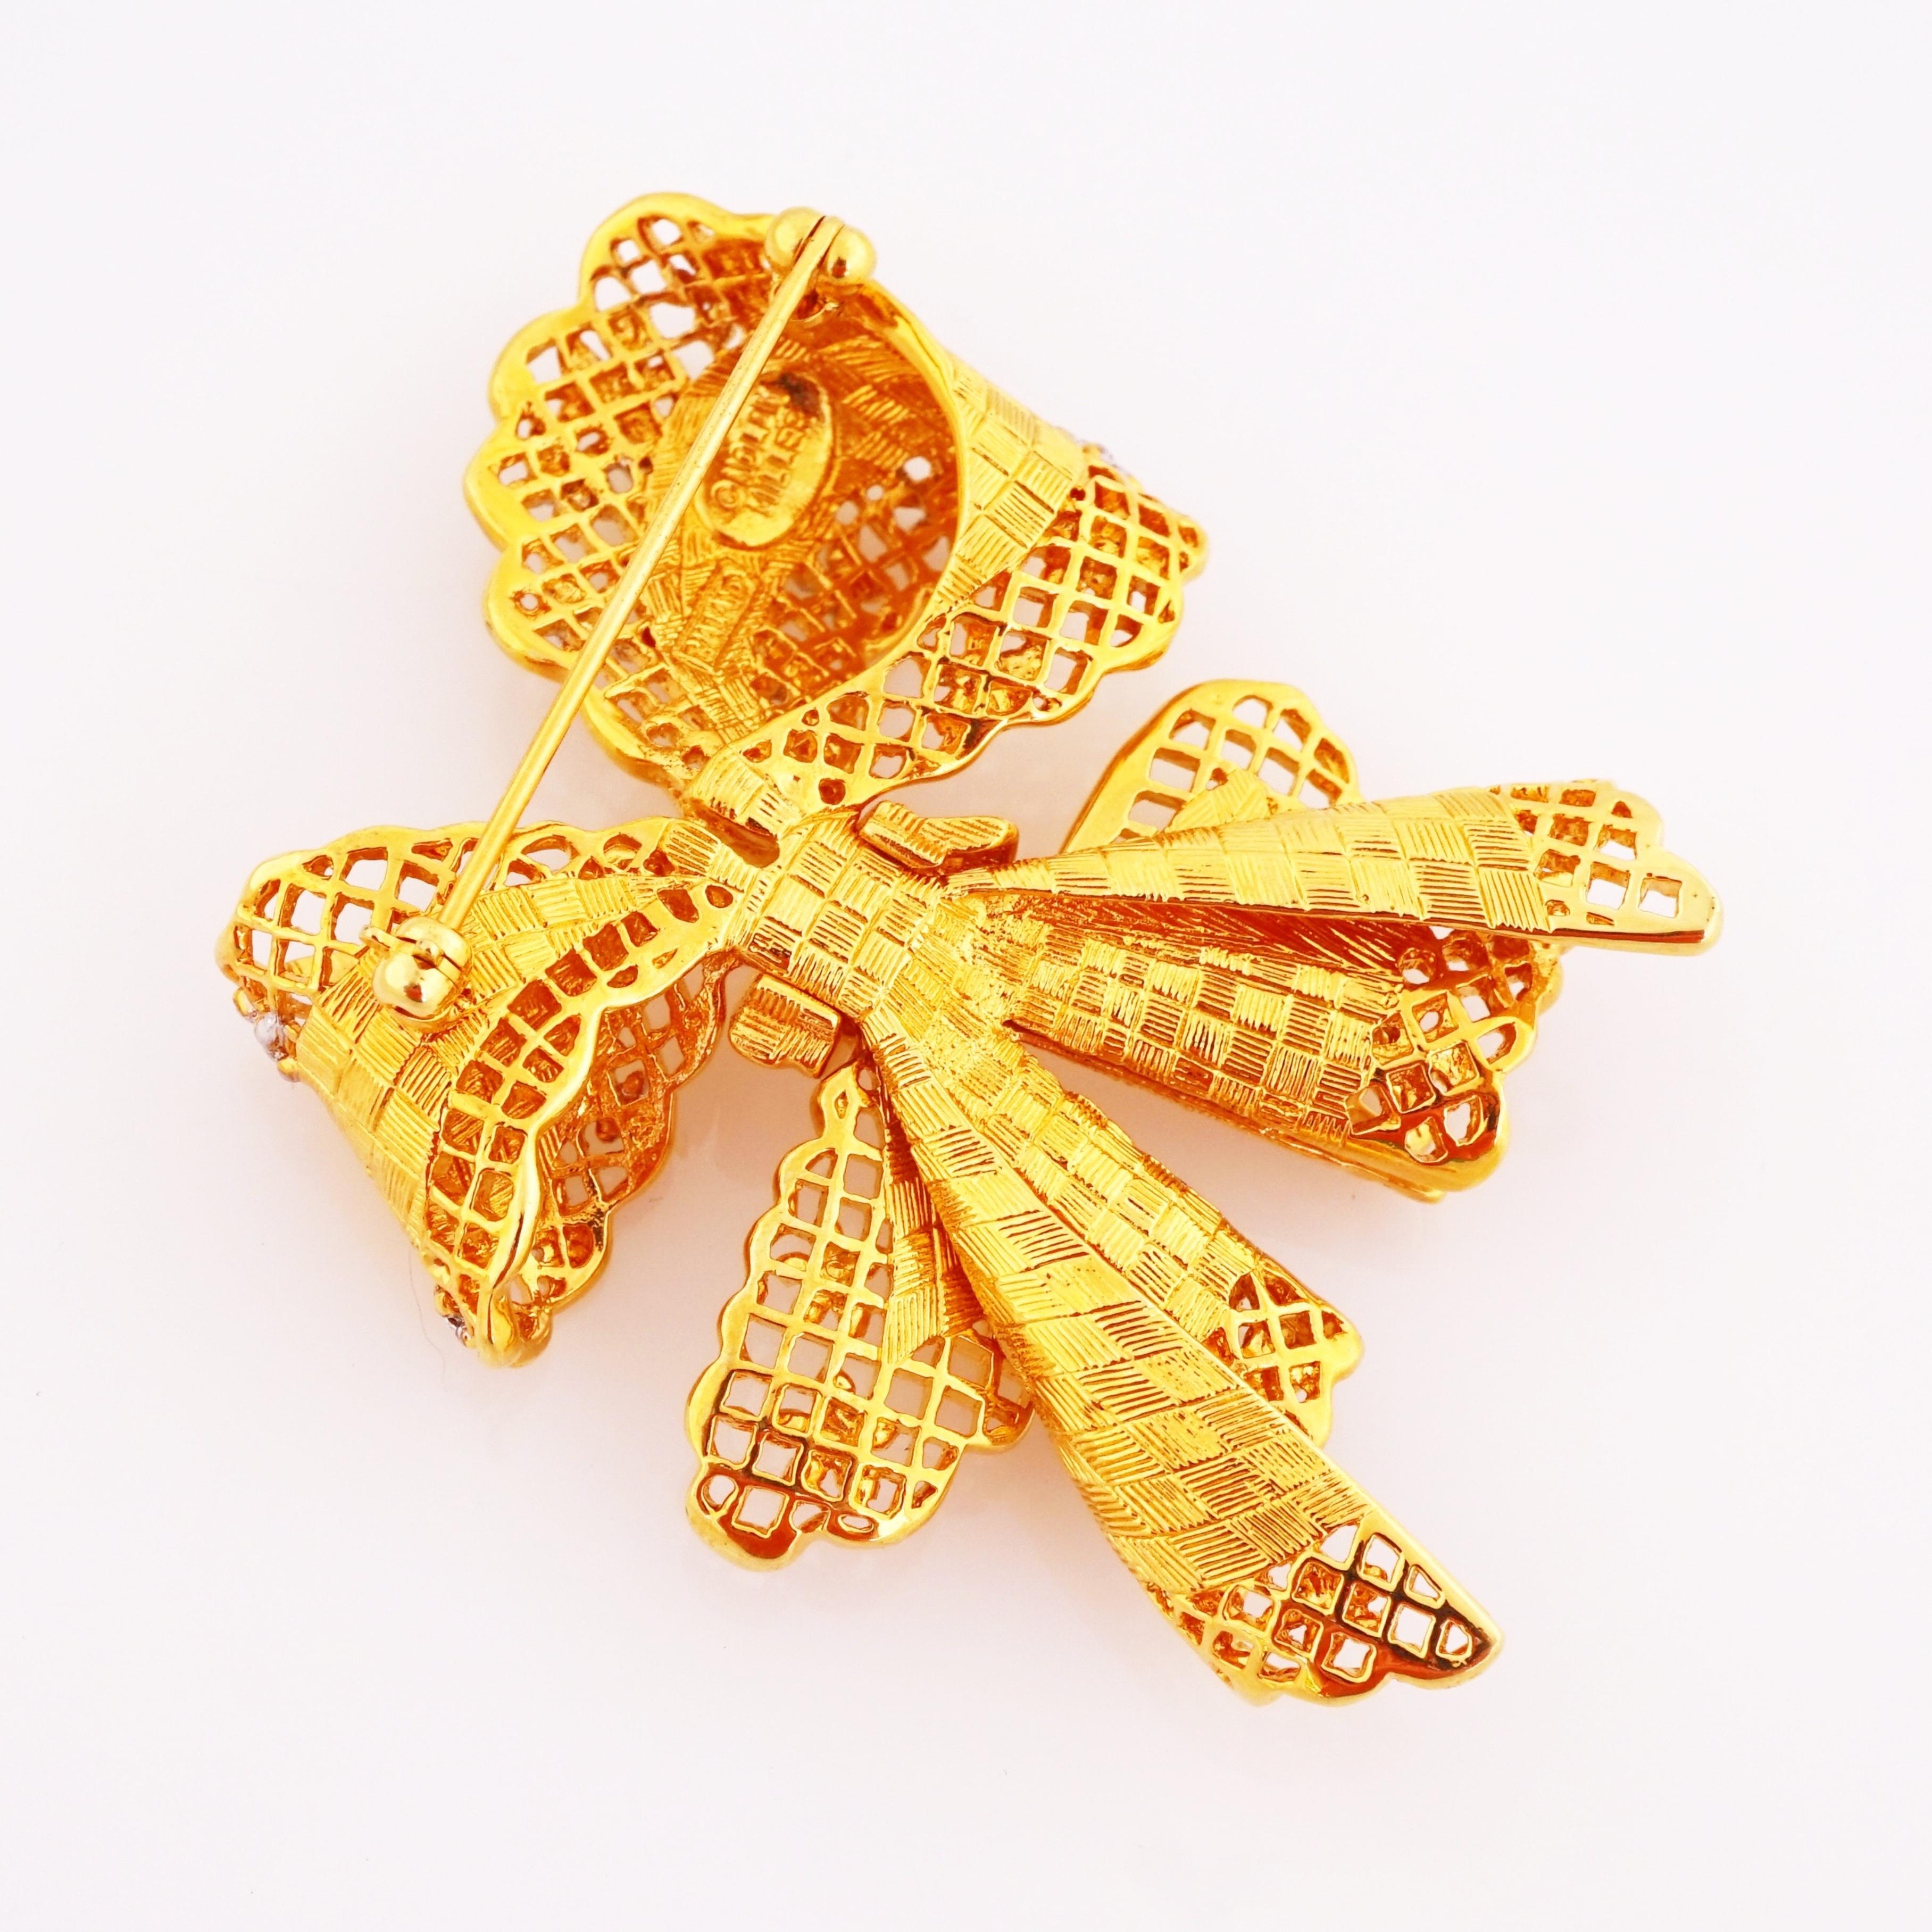 Modern Gold Bow Figural Brooch With Openwork Lattice and Floral Motif By Nolan Miller